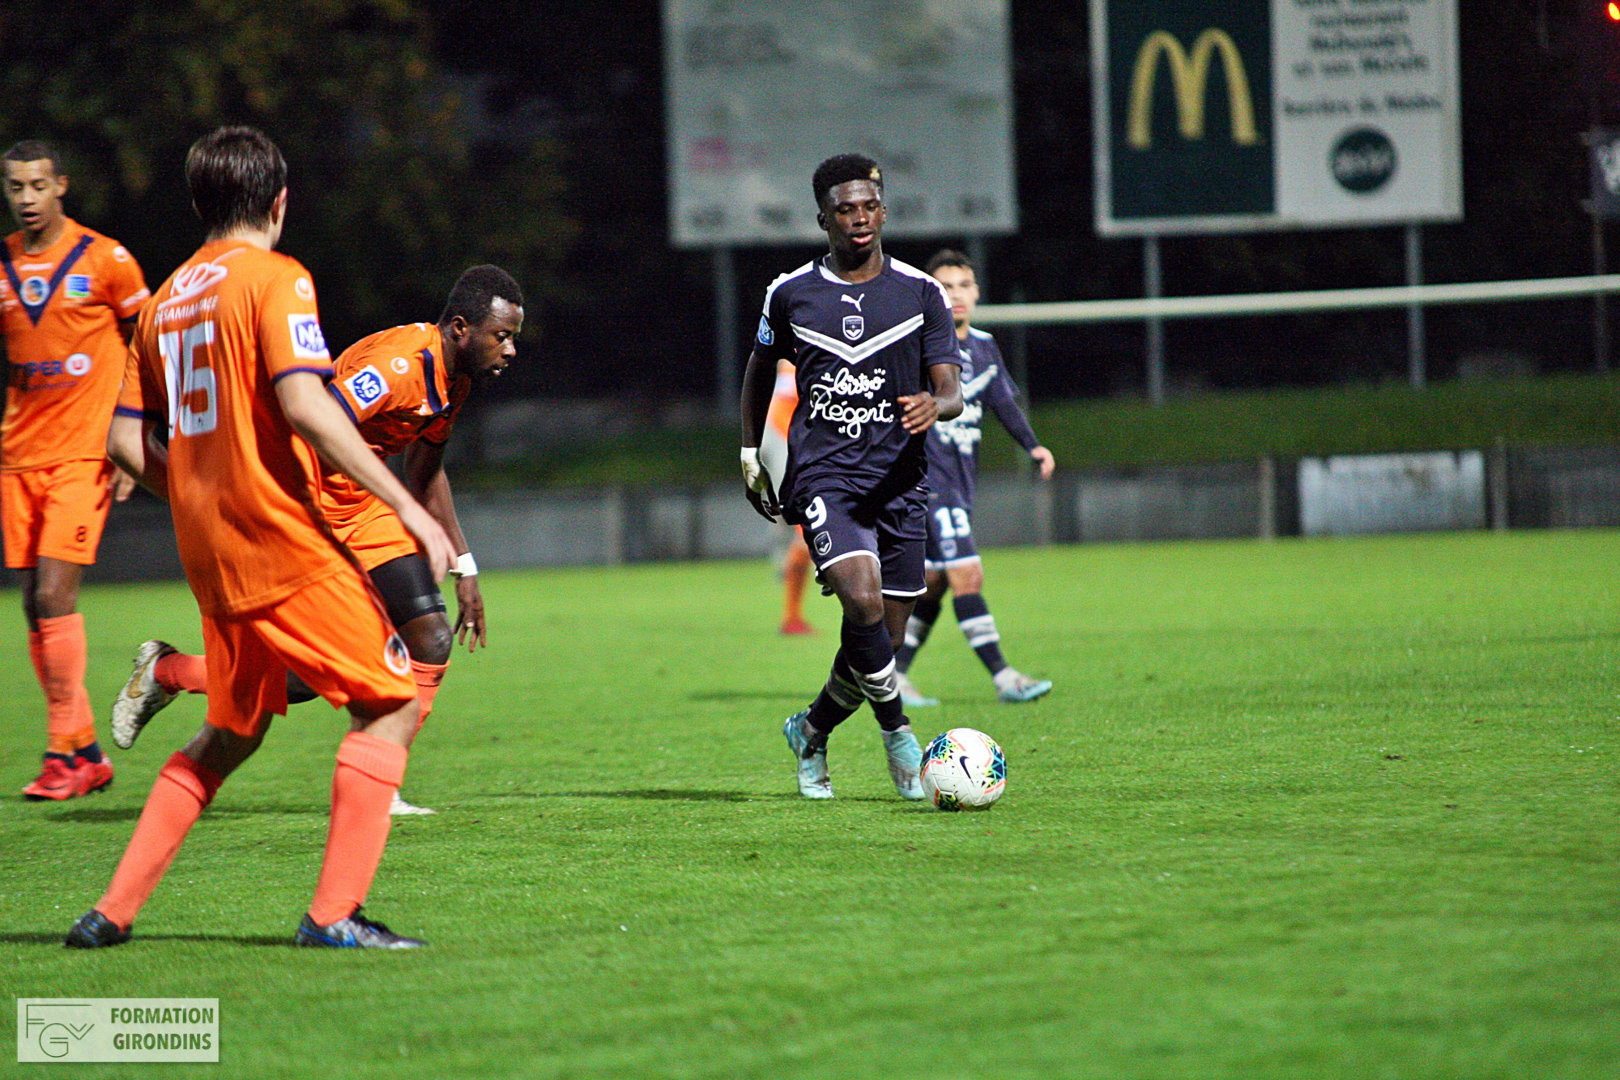 Cfa Girondins : Déplacement au Pays Basque - Formation Girondins 